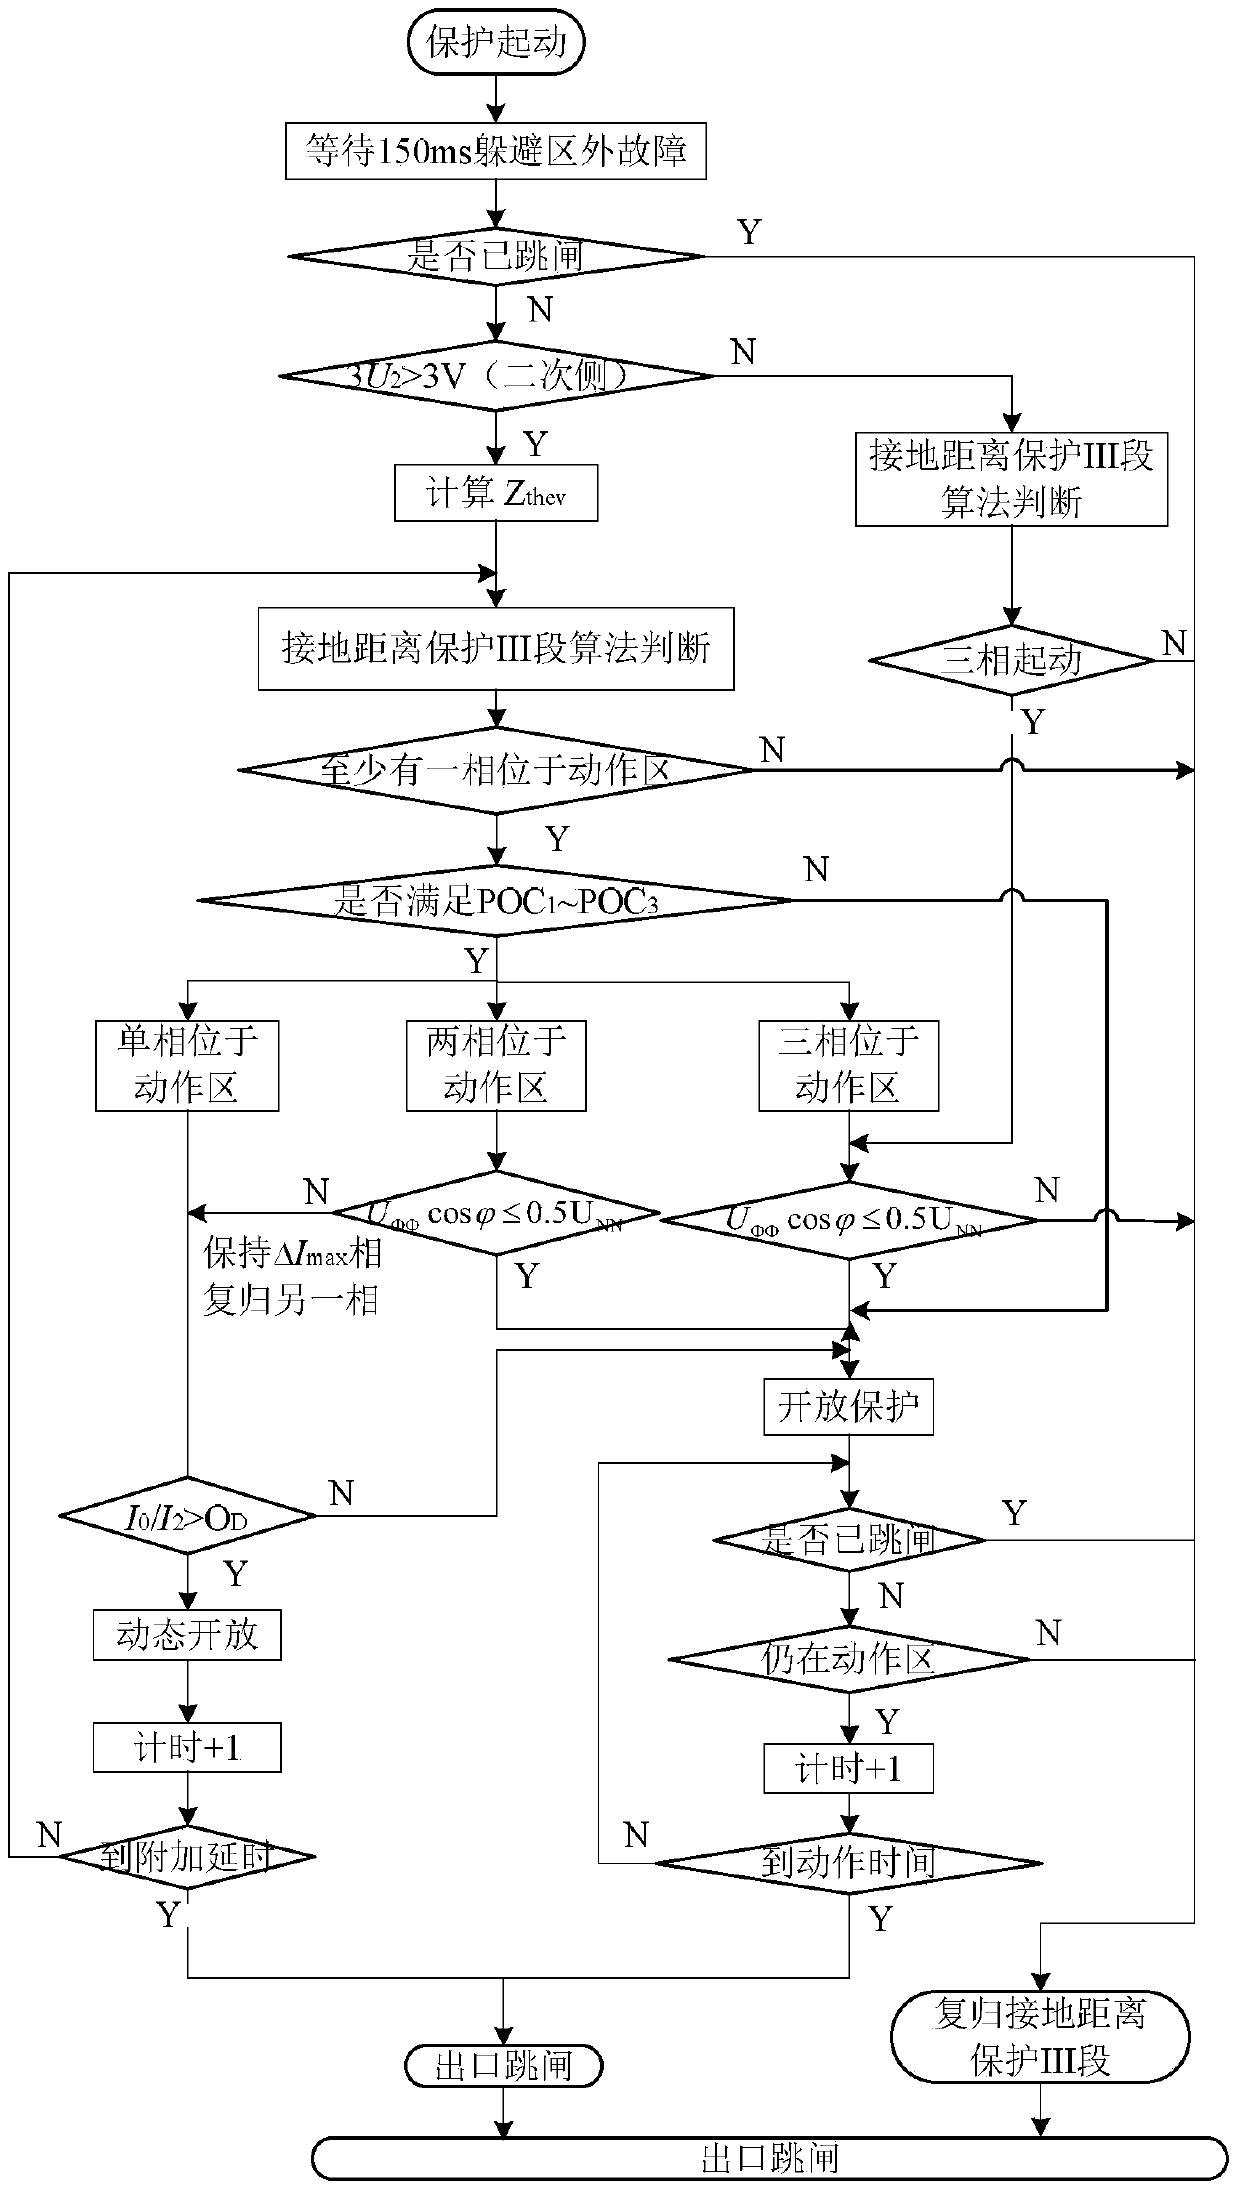 Accident overload blocking method for station domain distance protection stage iii